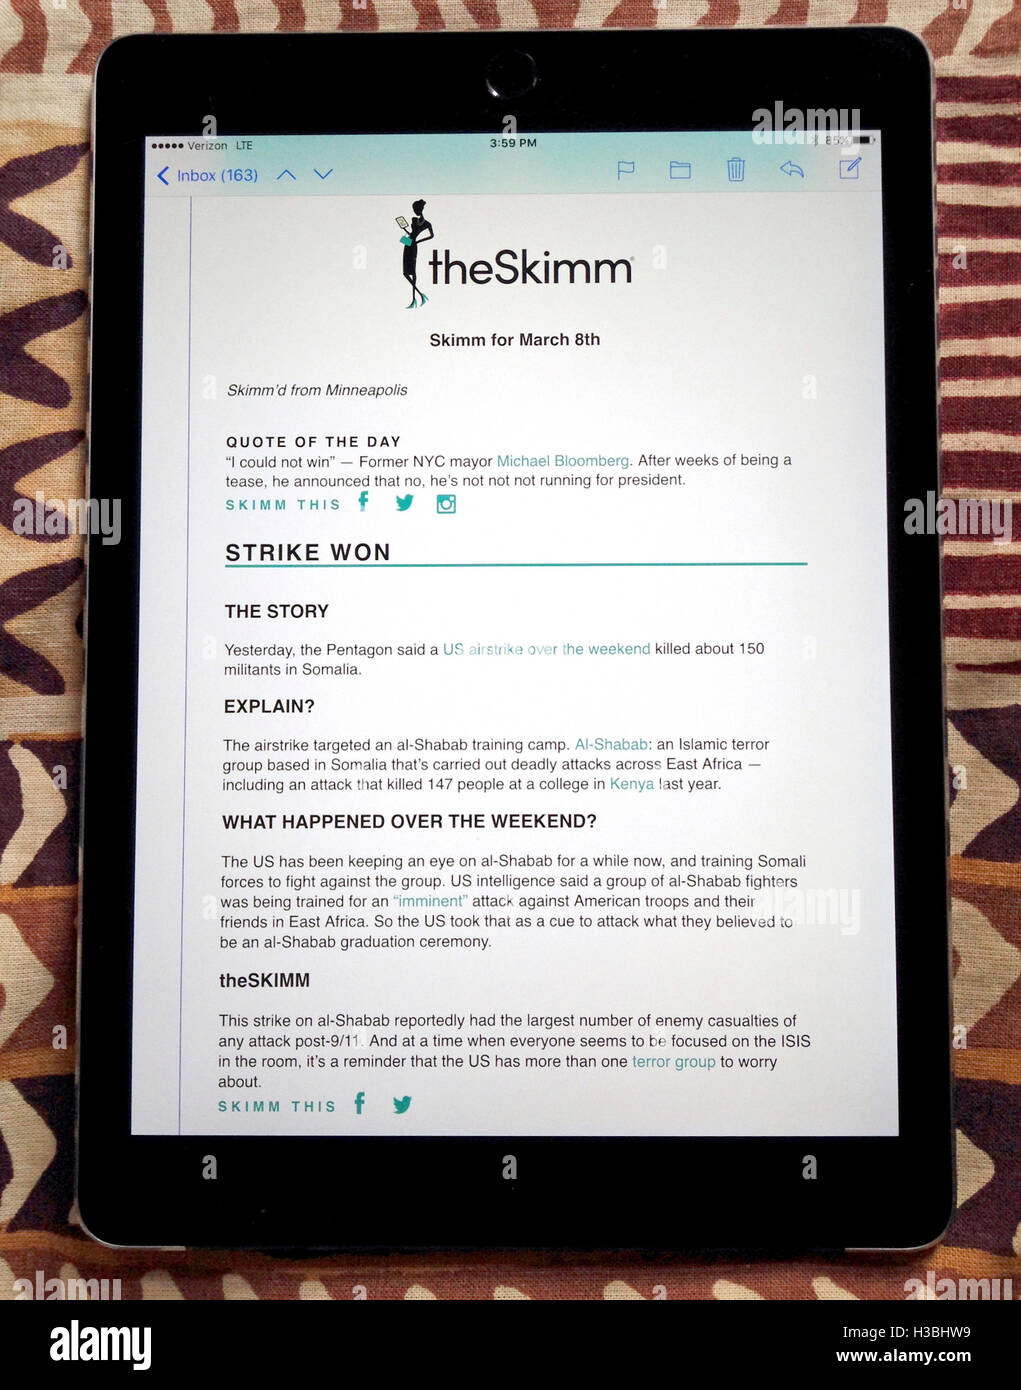 theSkimm, an email newsletter with daily editorial content. Stock Photo